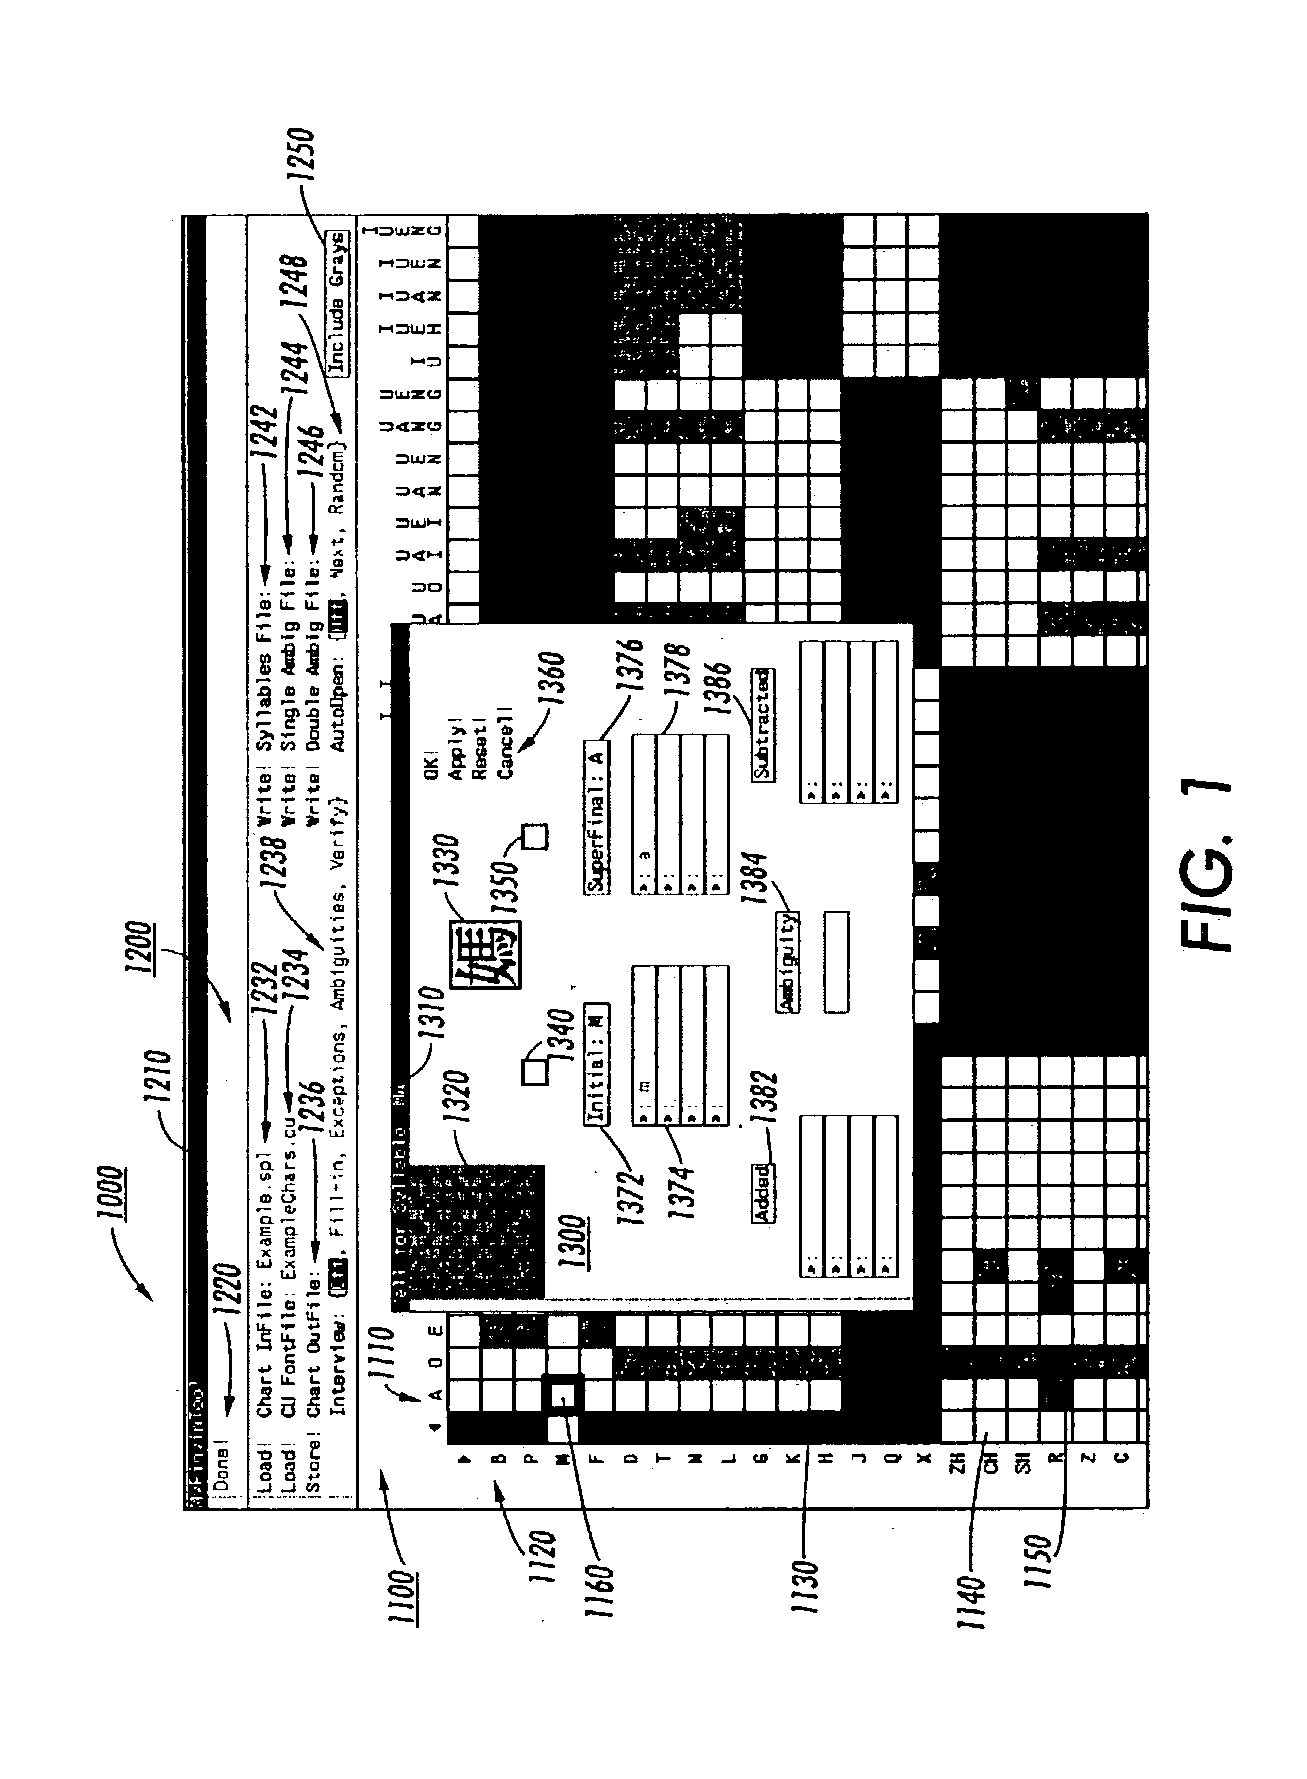 User-tailorable romanized chinese text input systems and methods